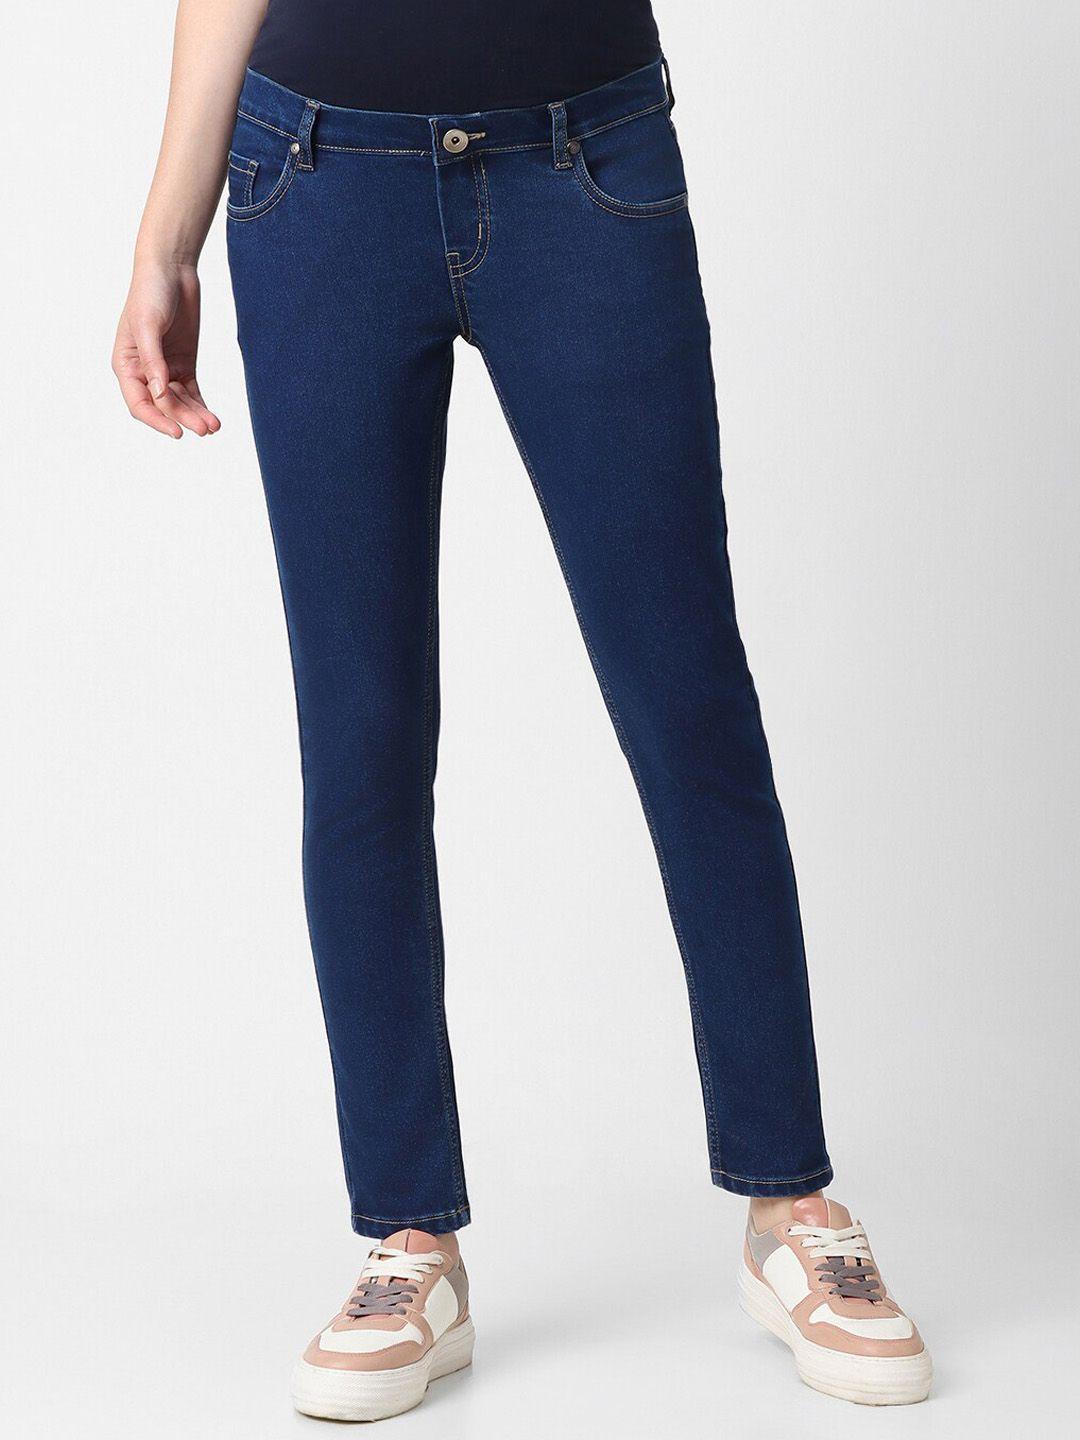 mystere-paris-women-relaxed-fit-comfort-maternity-jeans